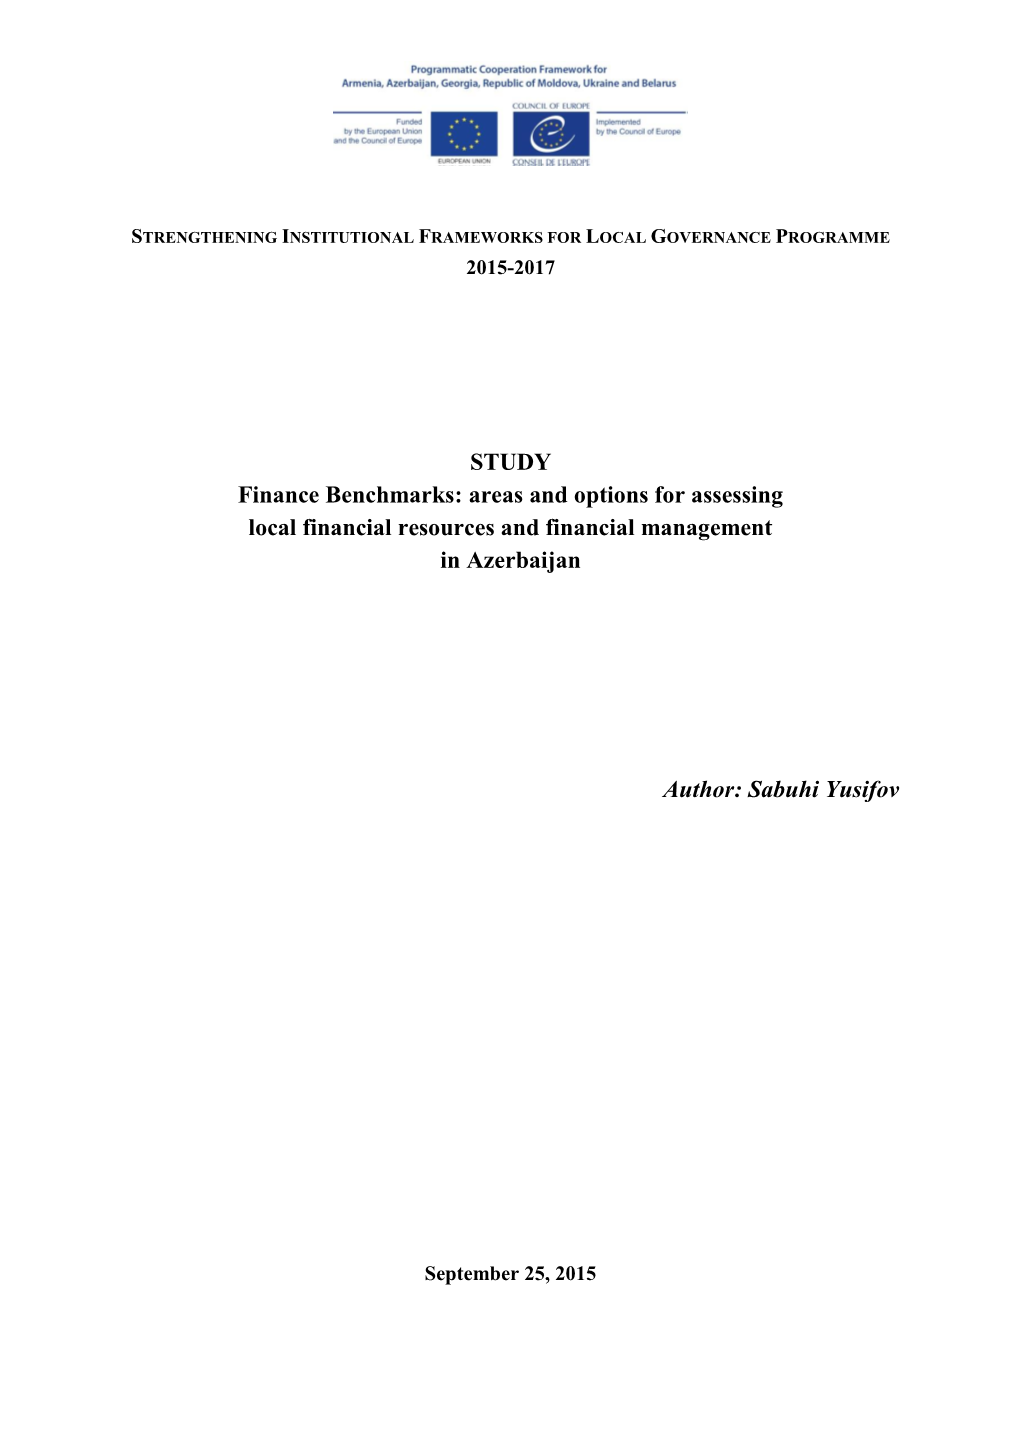 STUDY Finance Benchmarks: Areas and Options for Assessing Local Financial Resources and Financial Management in Azerbaijan